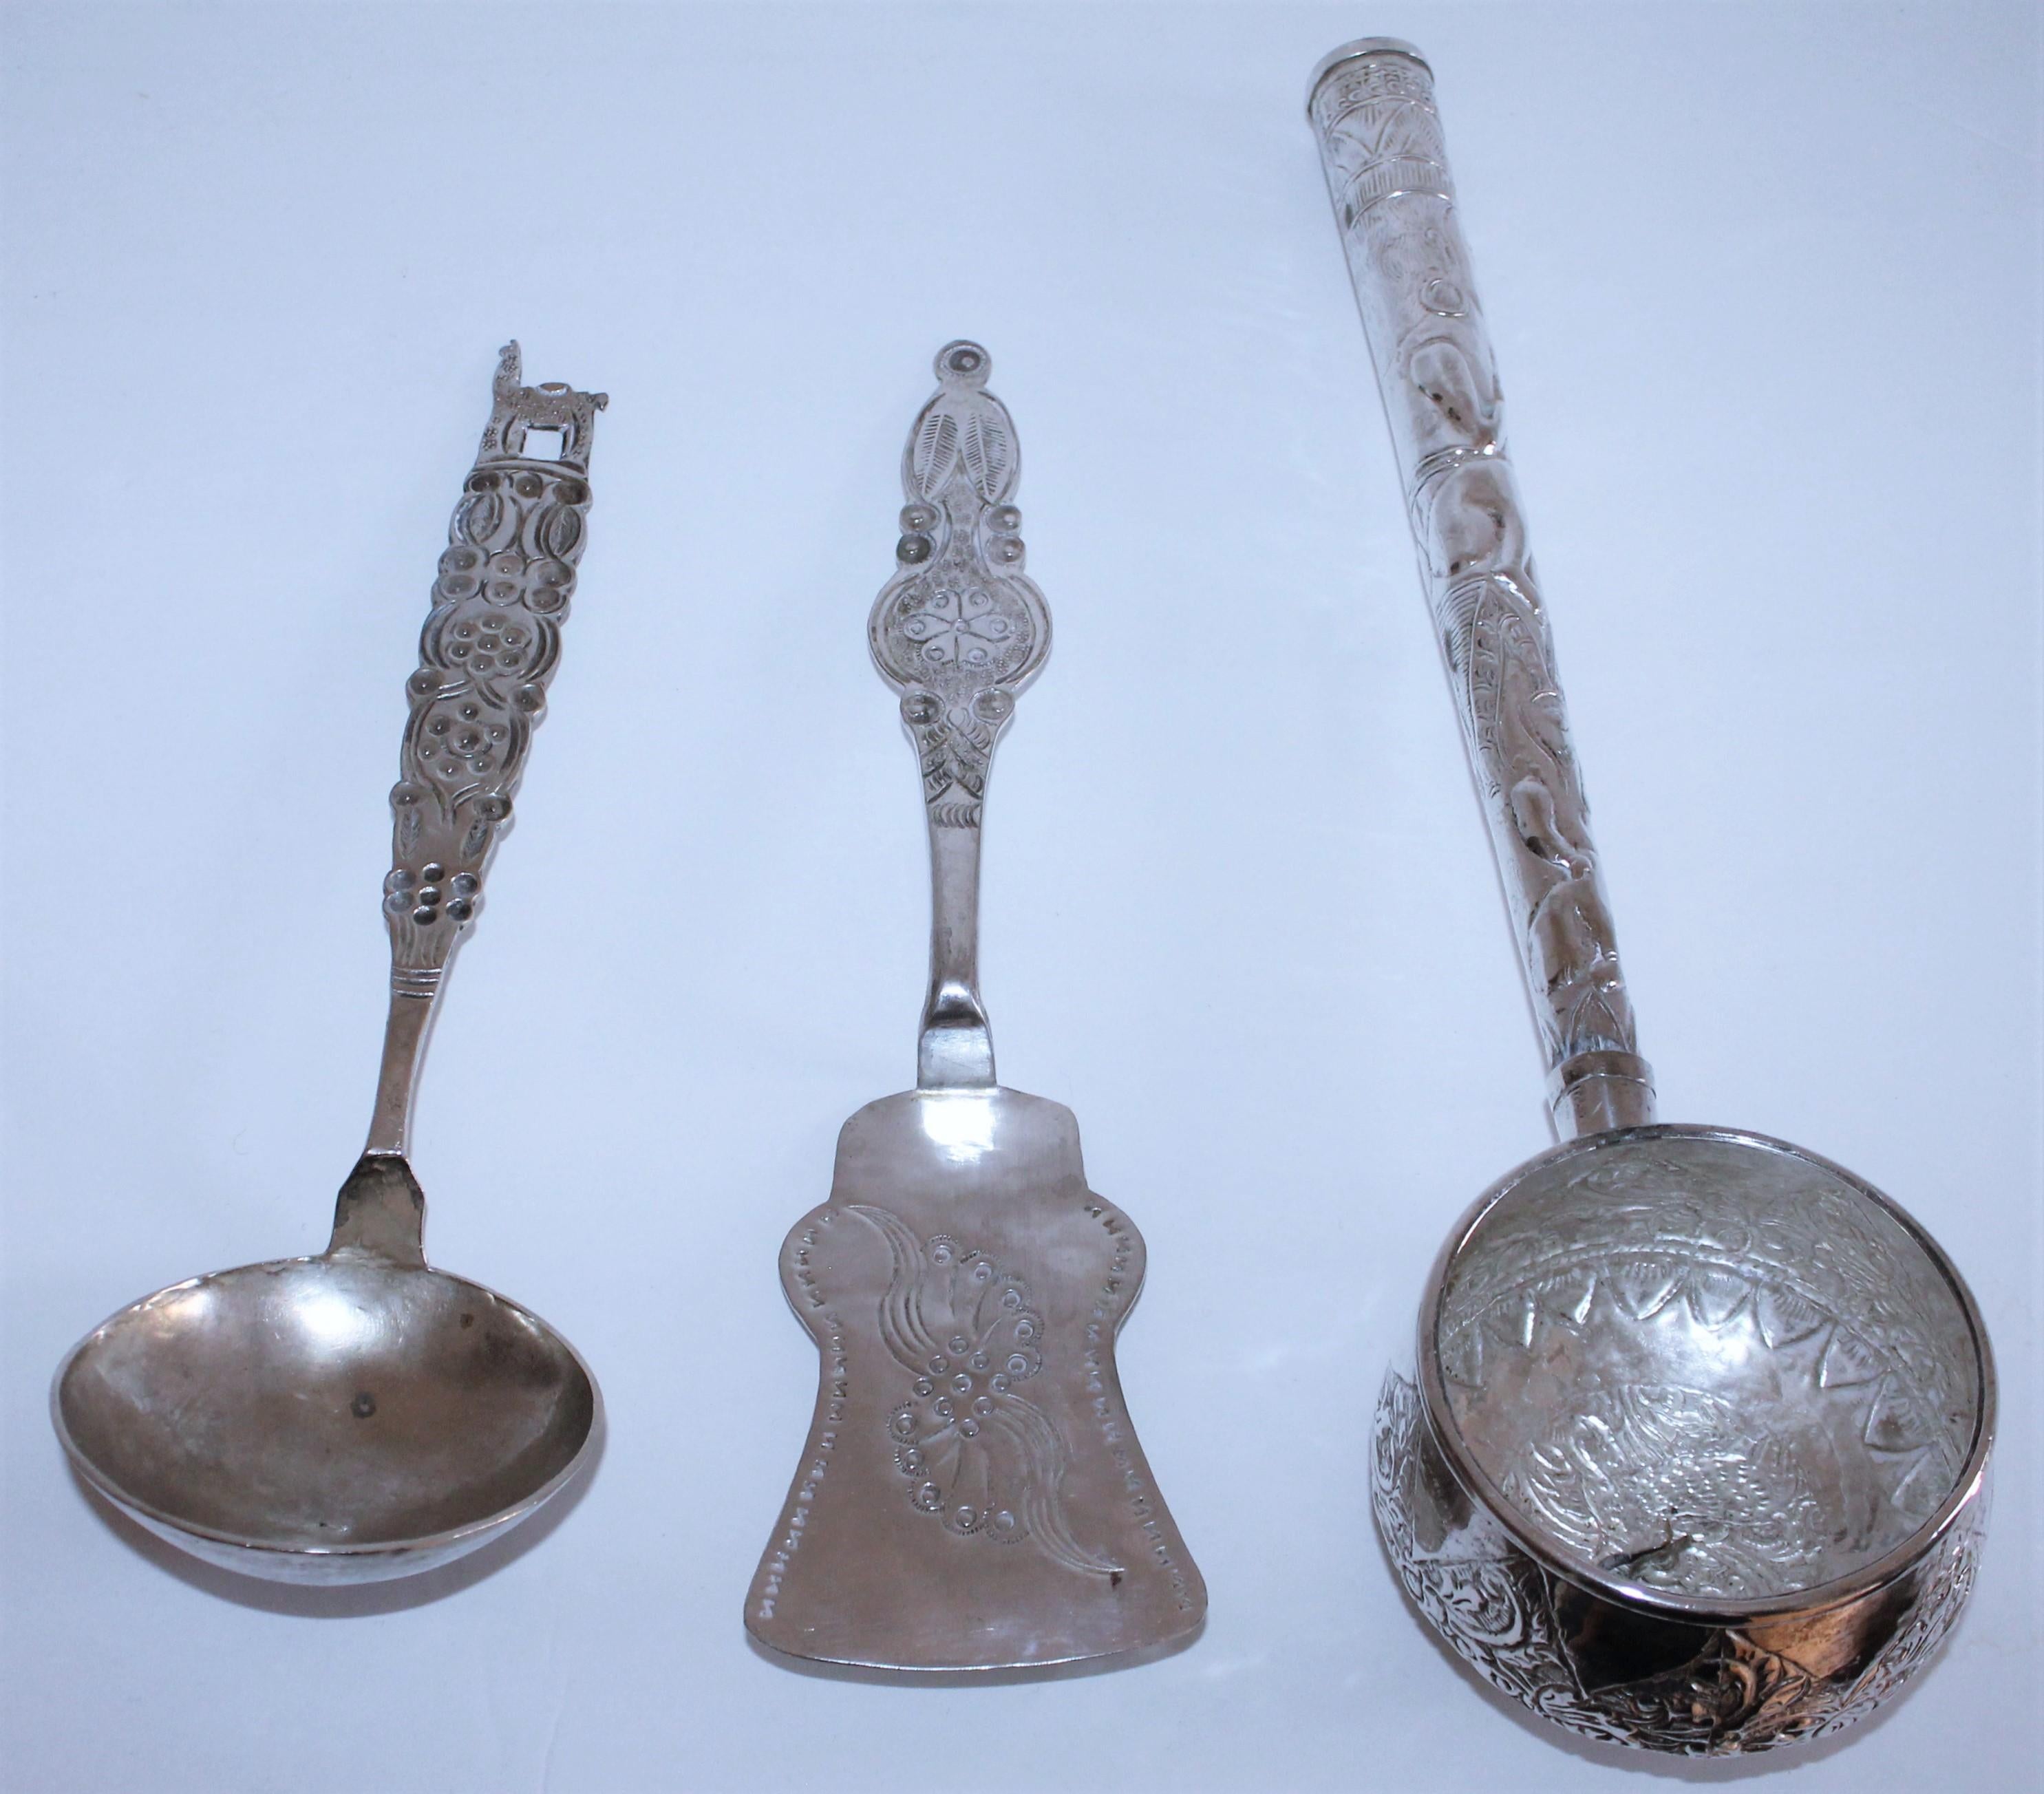 Handmade Peruvian three-piece sterling silver dipper and spatula and ladle. These are handmade and unmarked from the artist or maker.
Measurements from left to right:

Small spoon- 11 H x 3.5 W x 2.5 D
Spatula- 11.5 H x 2.75 W x 1.25 D
Large